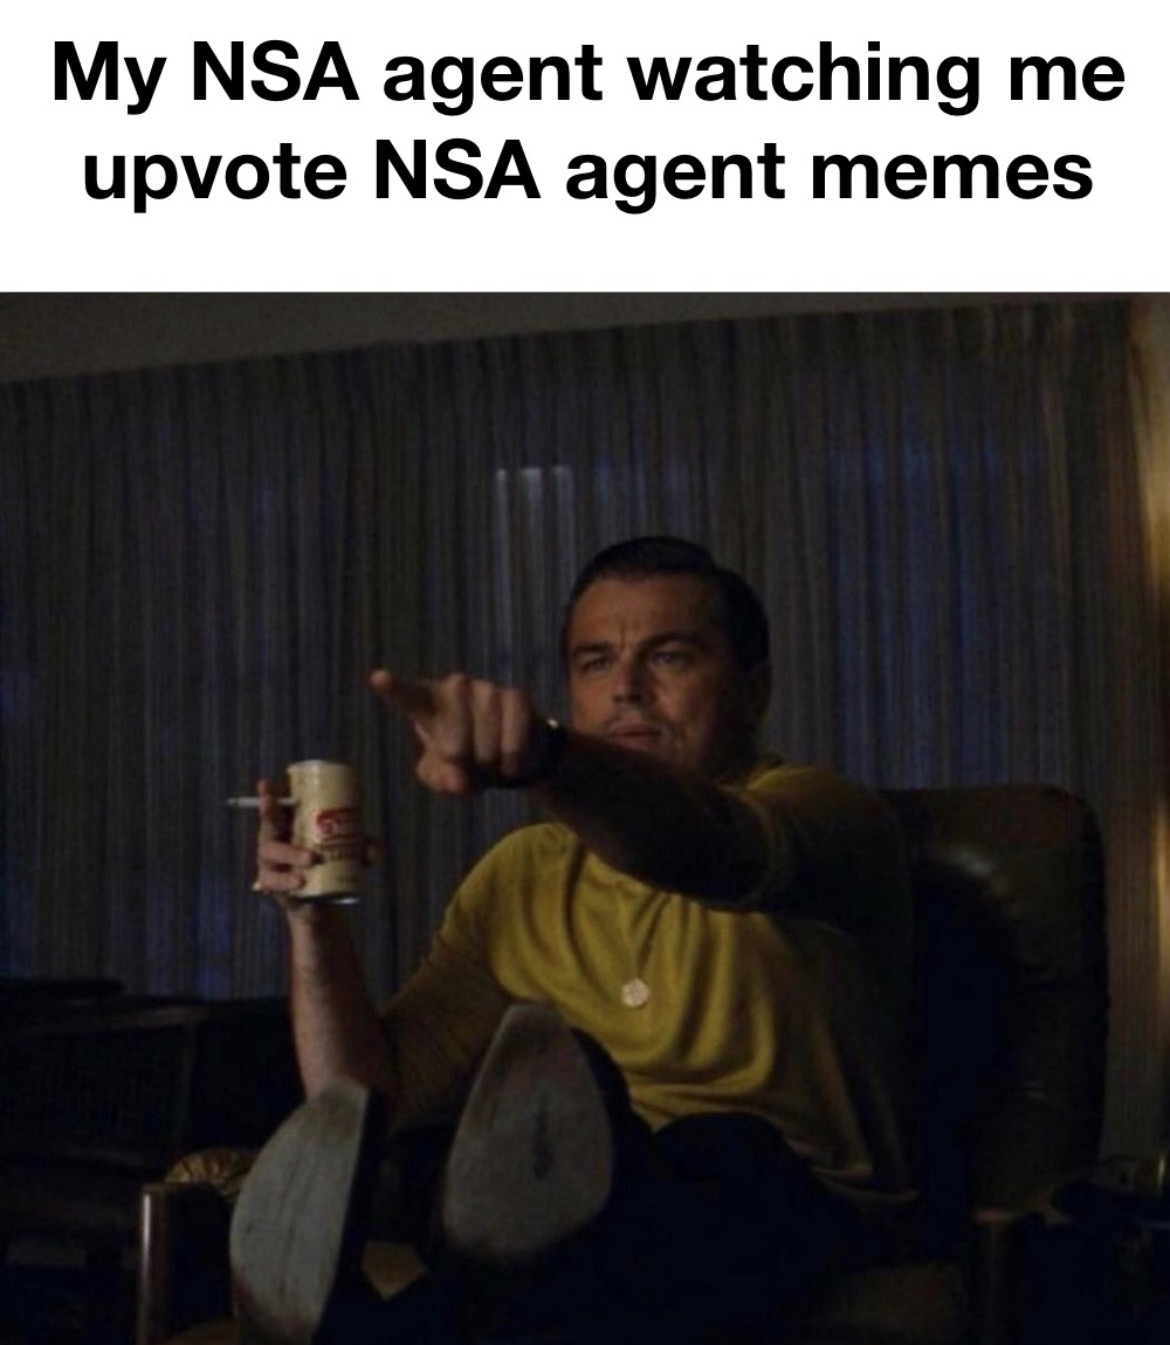 show you re watching - My Nsa agent watching me upvote Nsa agent memes